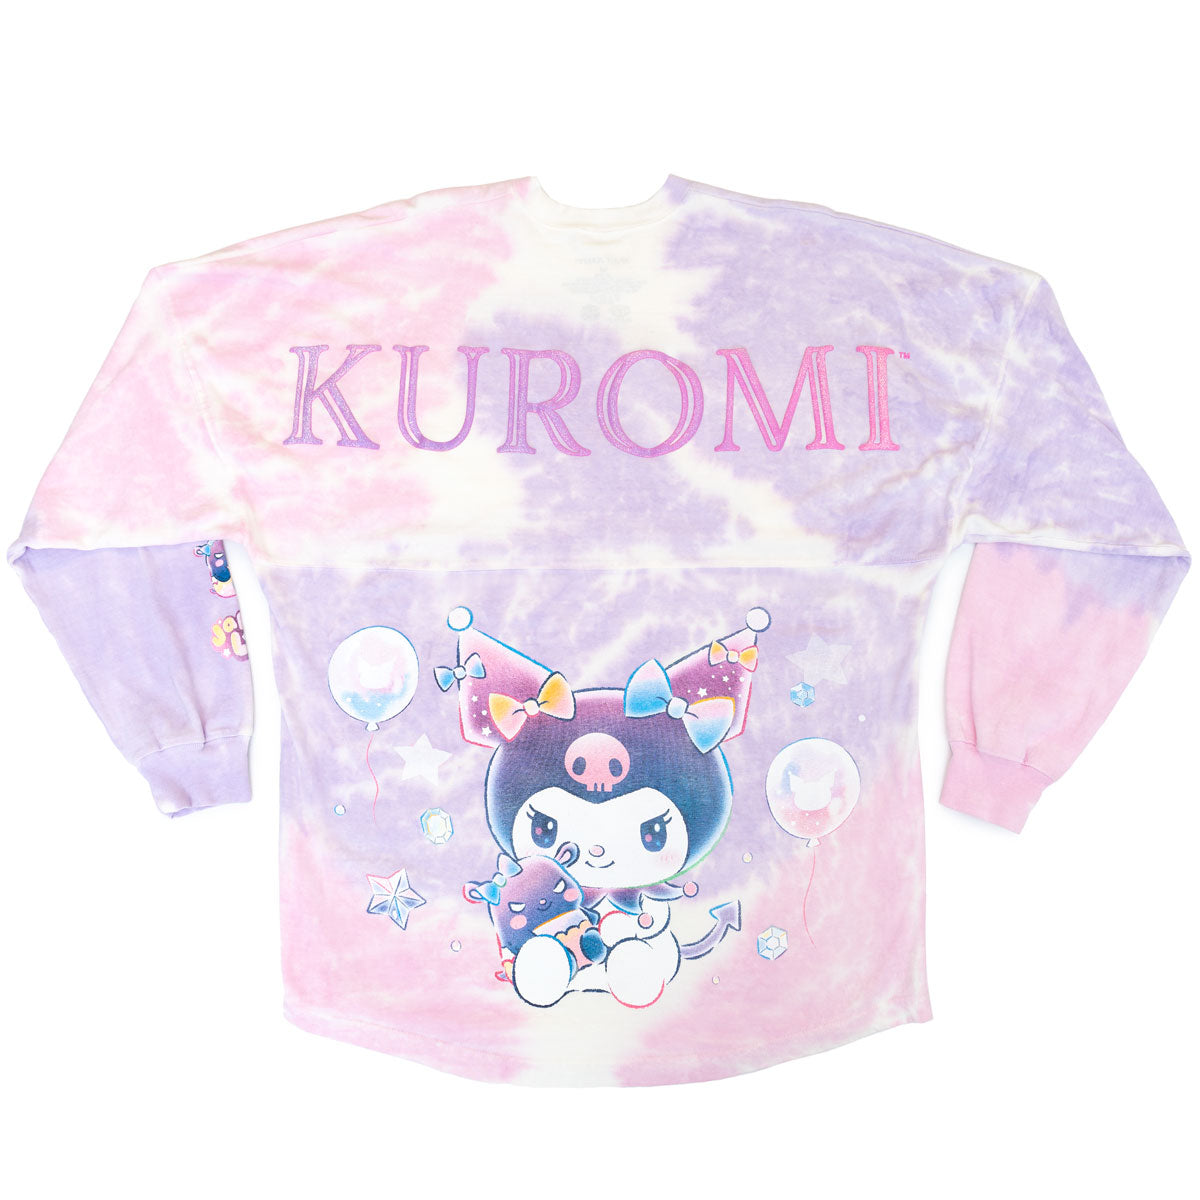 JapanLA X Hello Kitty and Friends by Spirit Jersey